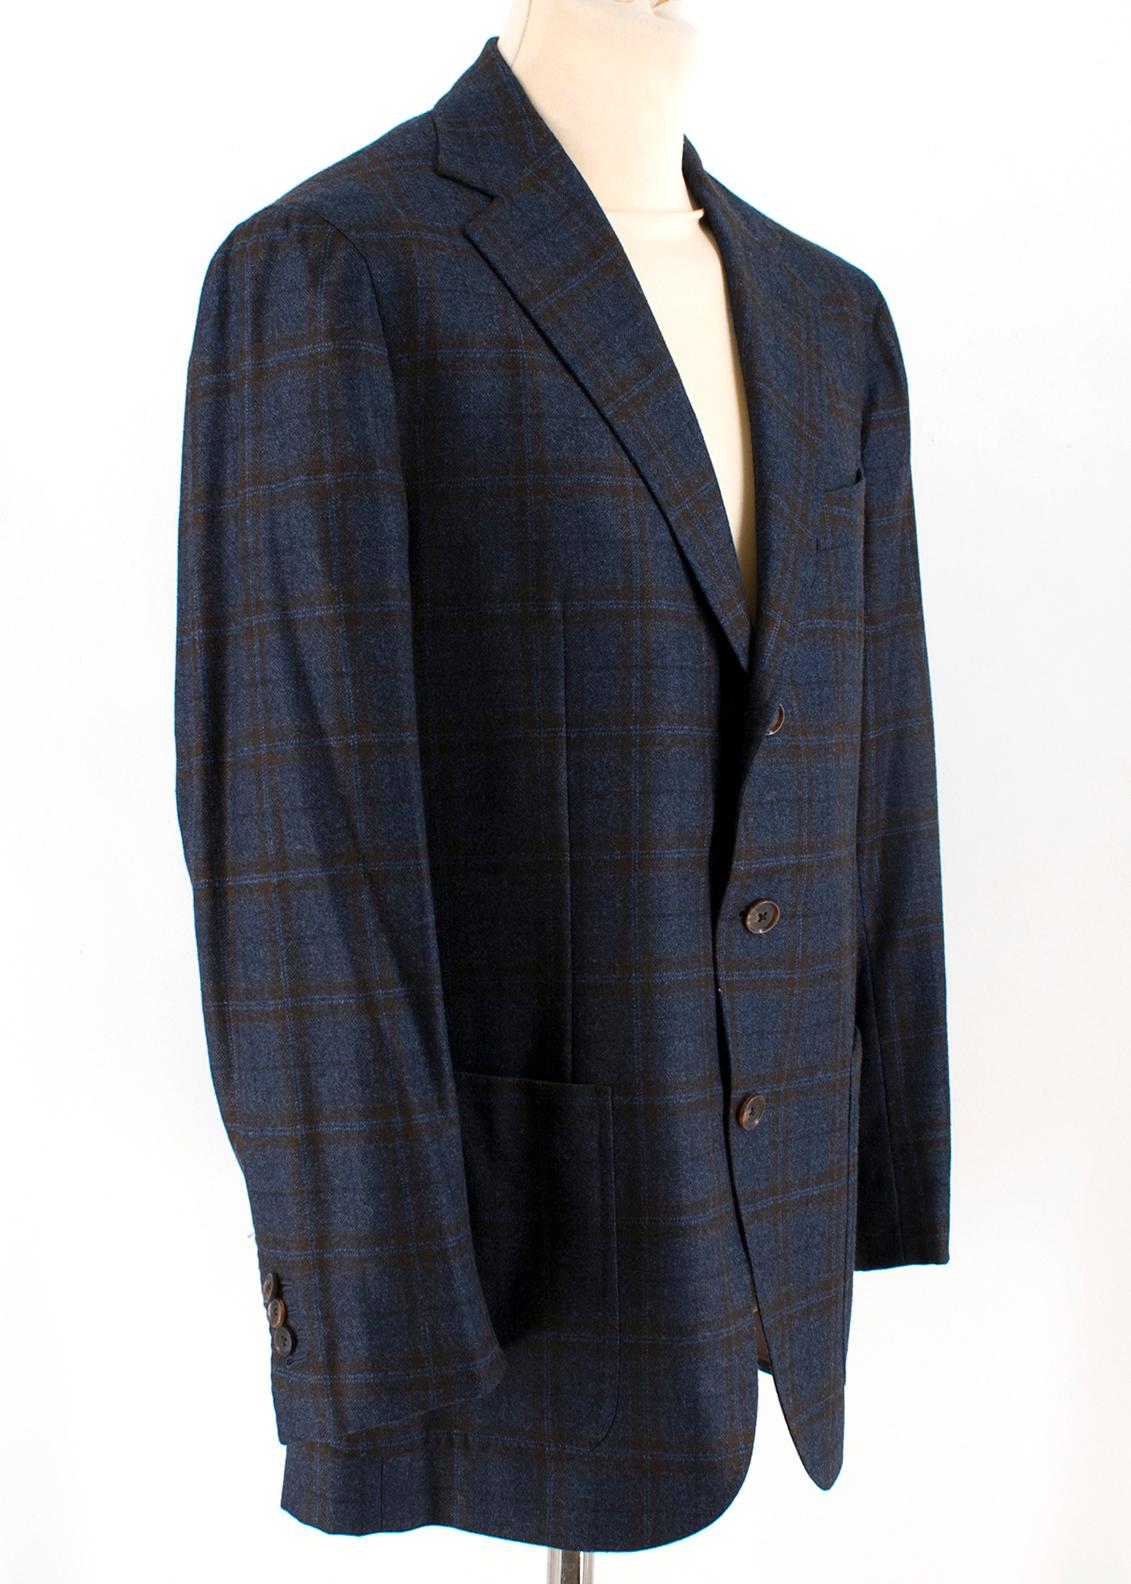 Doriani Navy Checked Wool, Cashmere & Silk Blend Blazer

- It features two front pockets, single breasted pocket (left), four interior pockets 
- Single breasted, brown button fastening
- Brown button cufflinks 

Please note, these items are